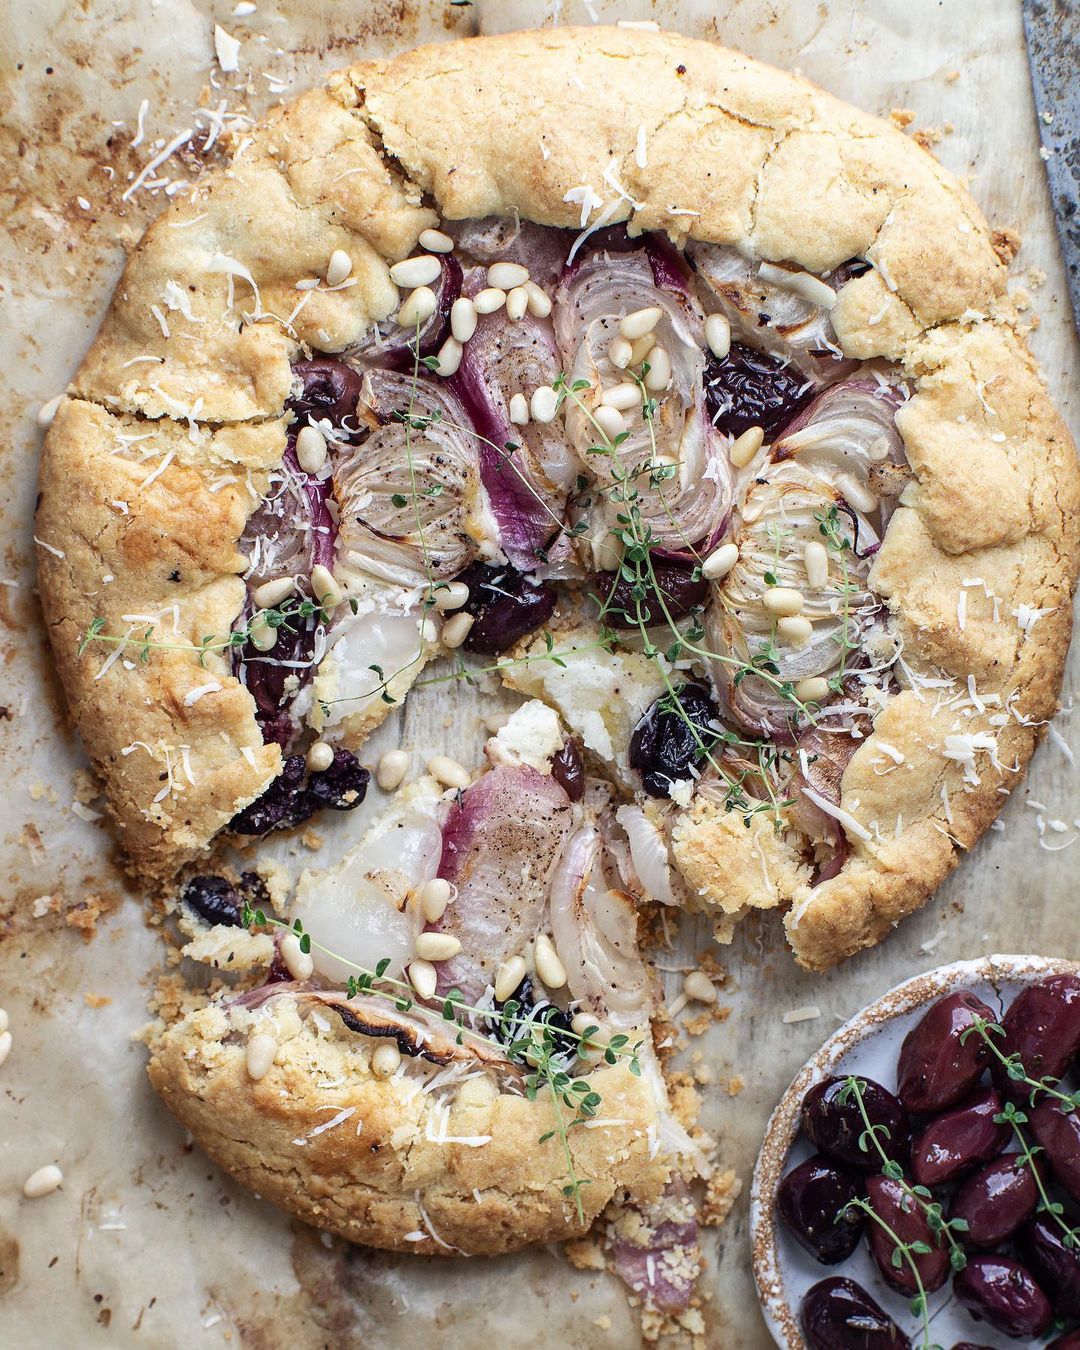 Snack galette with red onion, balsamic and pine nuts